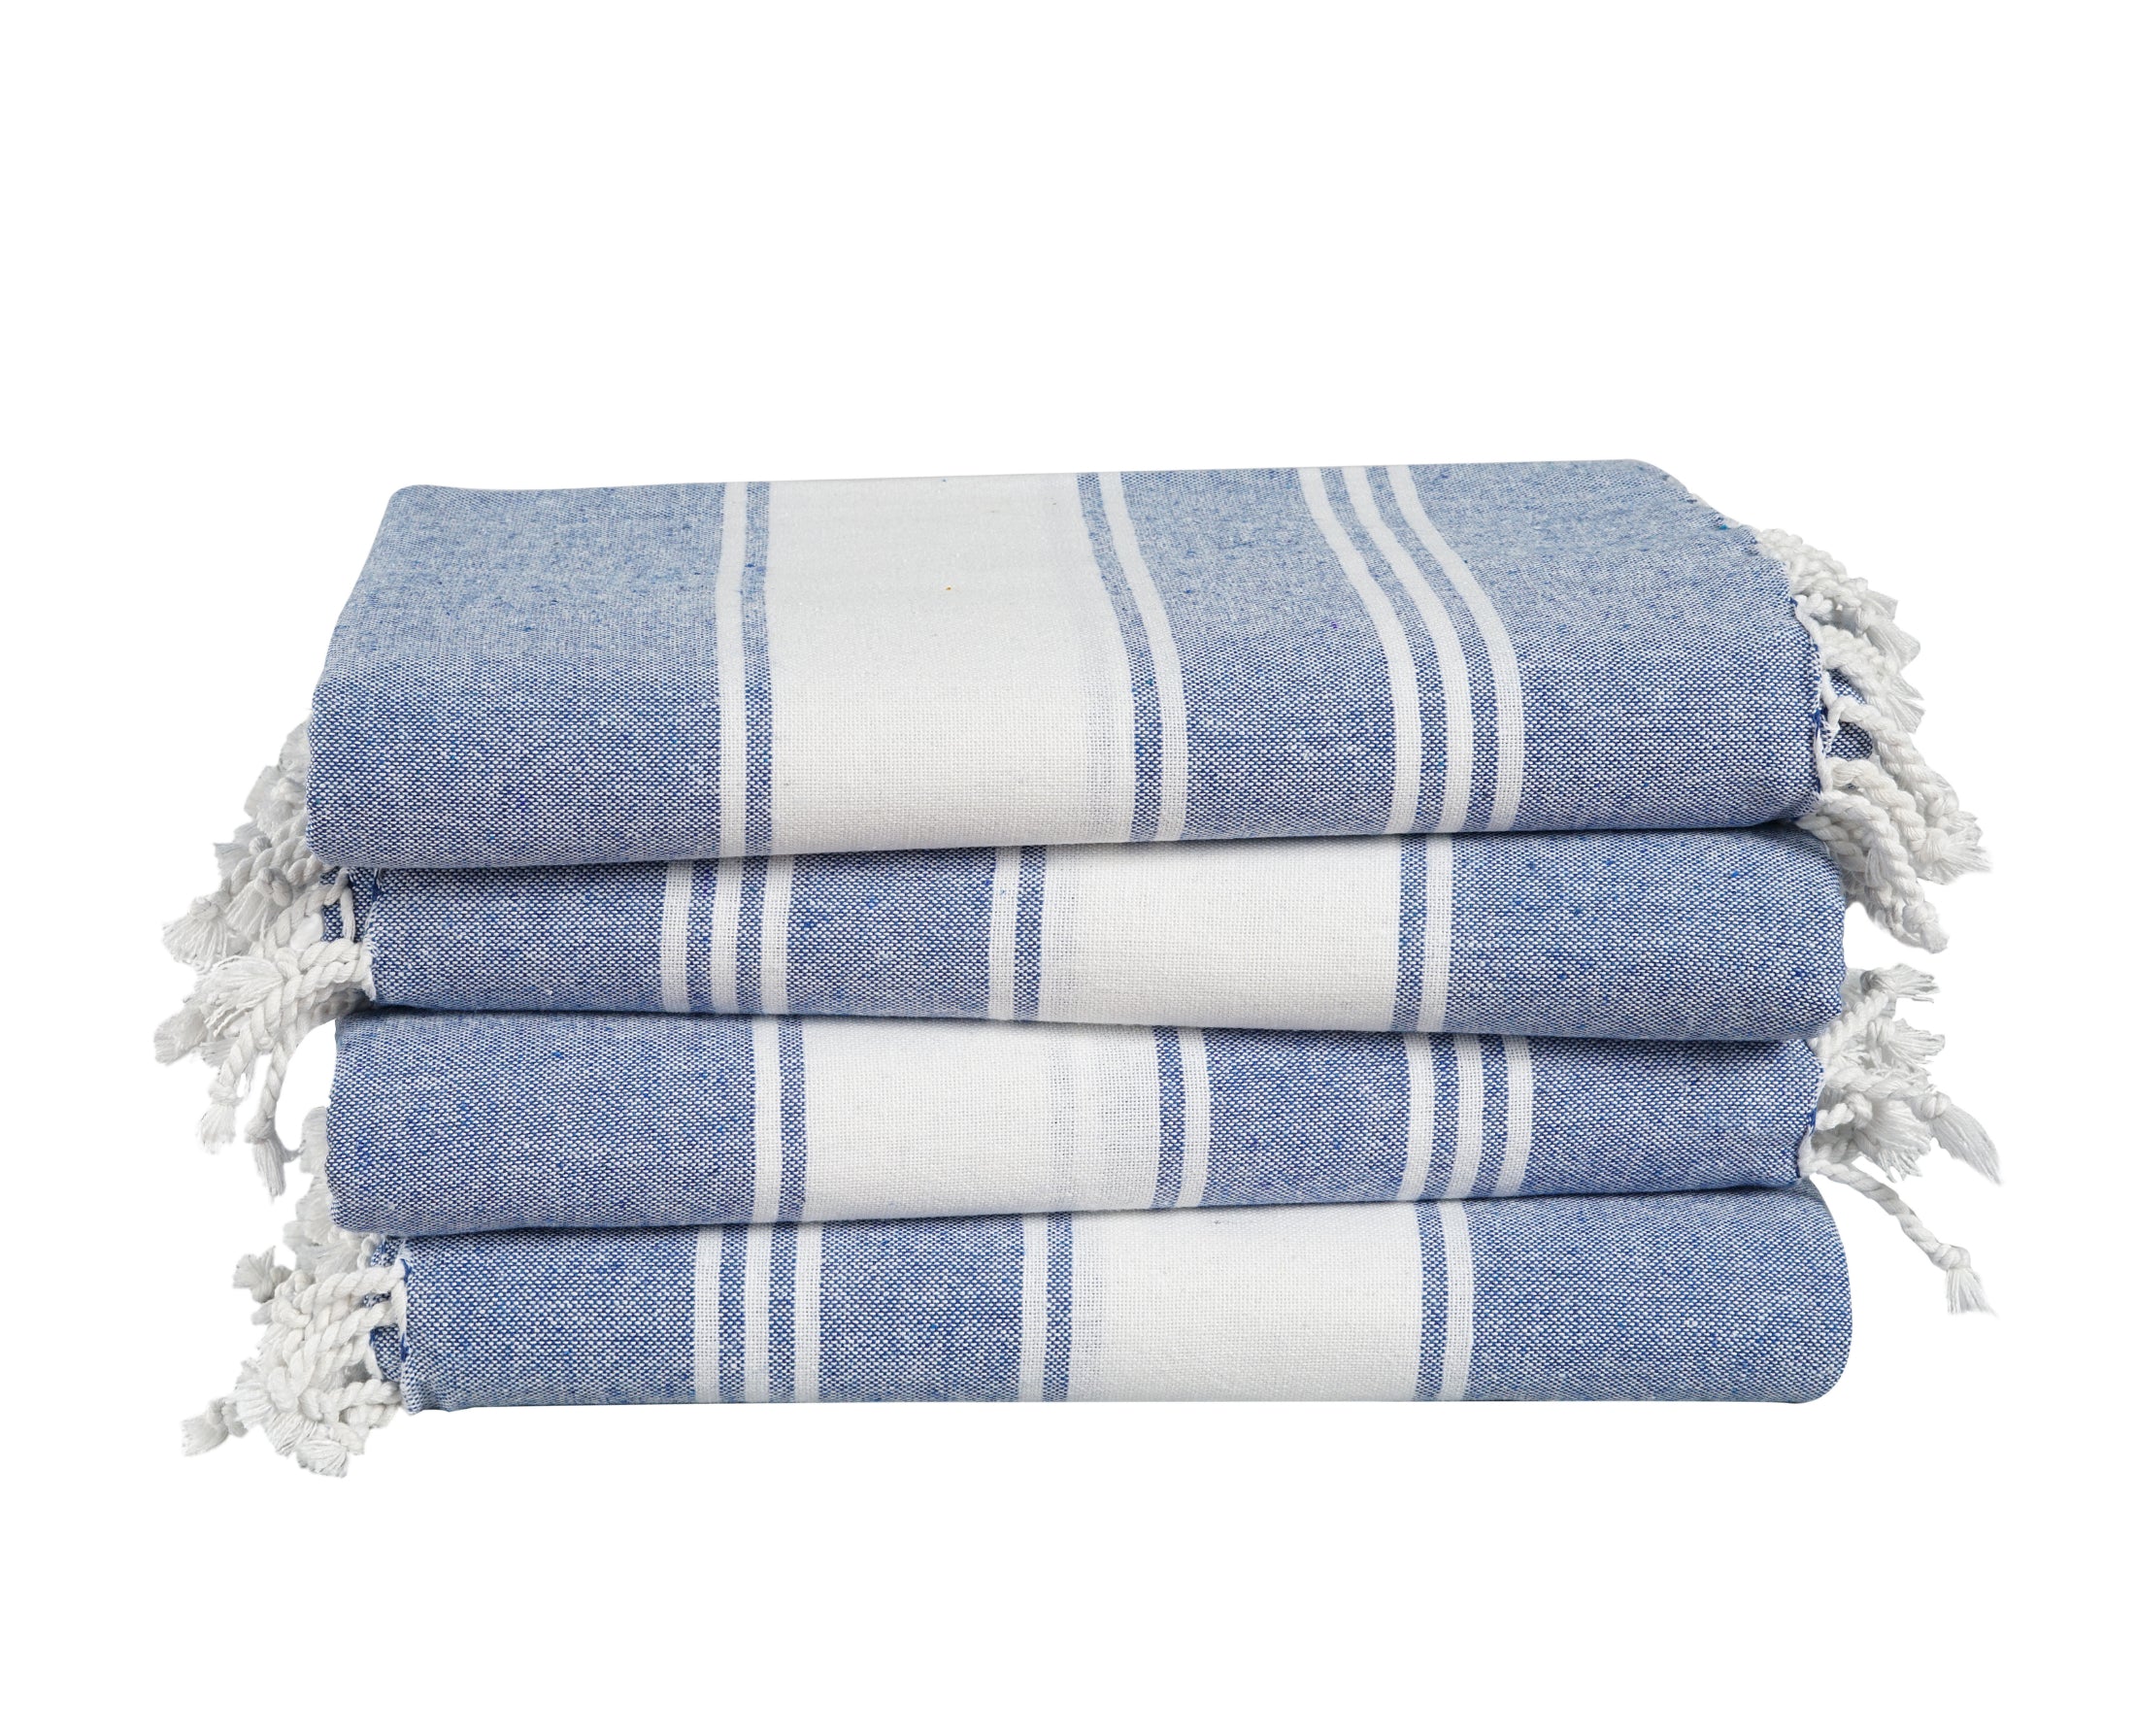 Set of 4 100% Cotton Chambray Turkish Beach Towels - Forever Blue